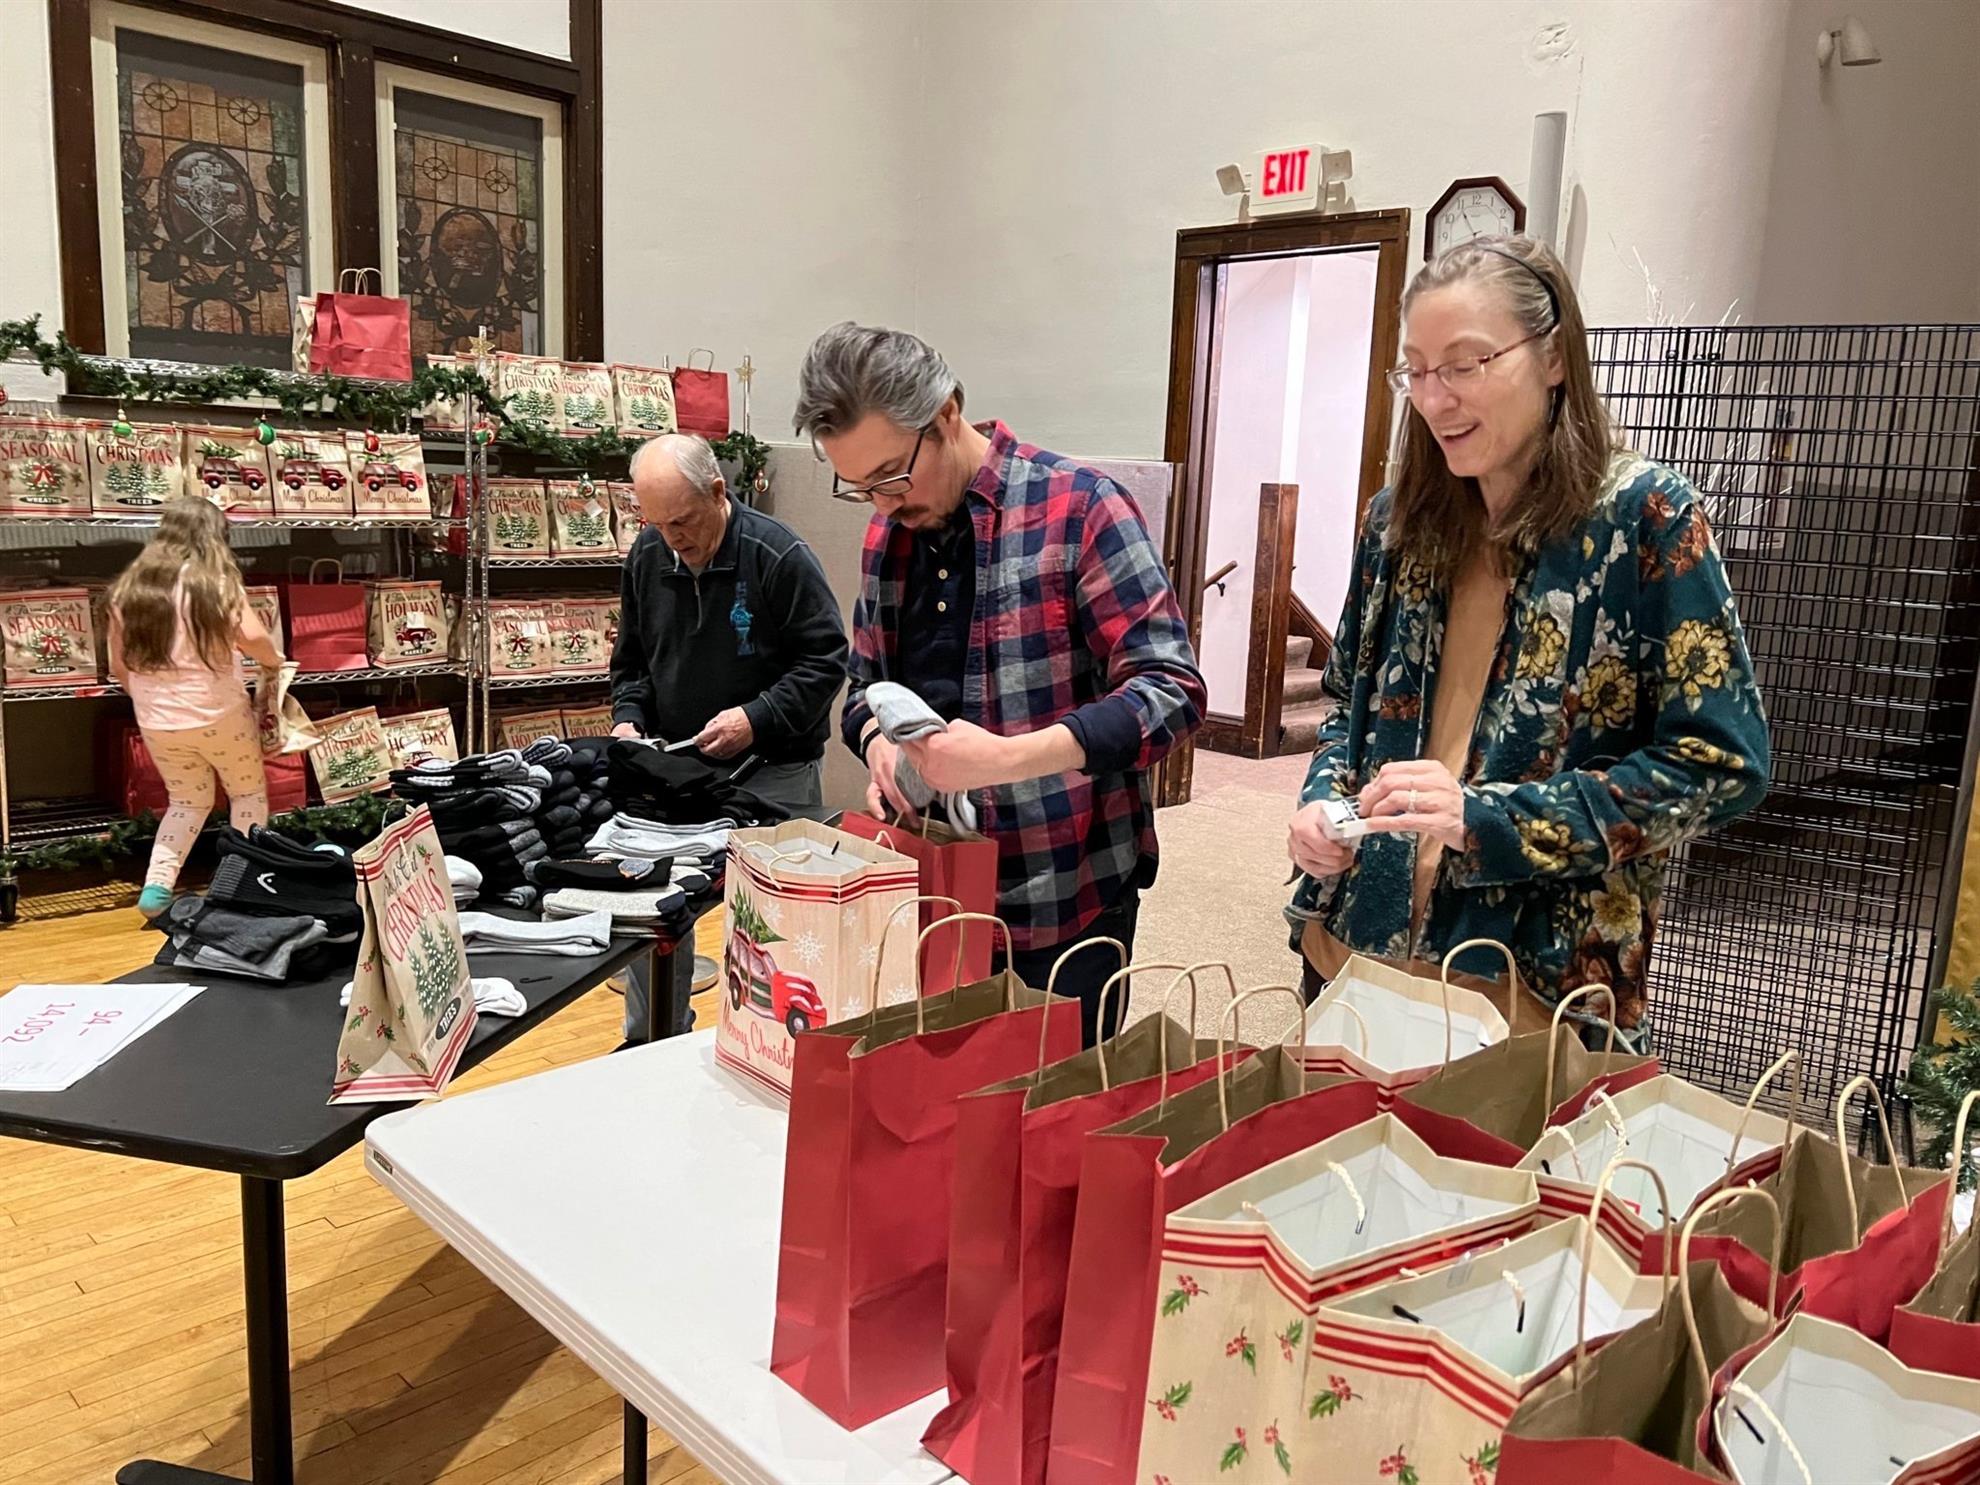 City of Lakes Rotary members pack gift bags for the CES food shelf holiday event.